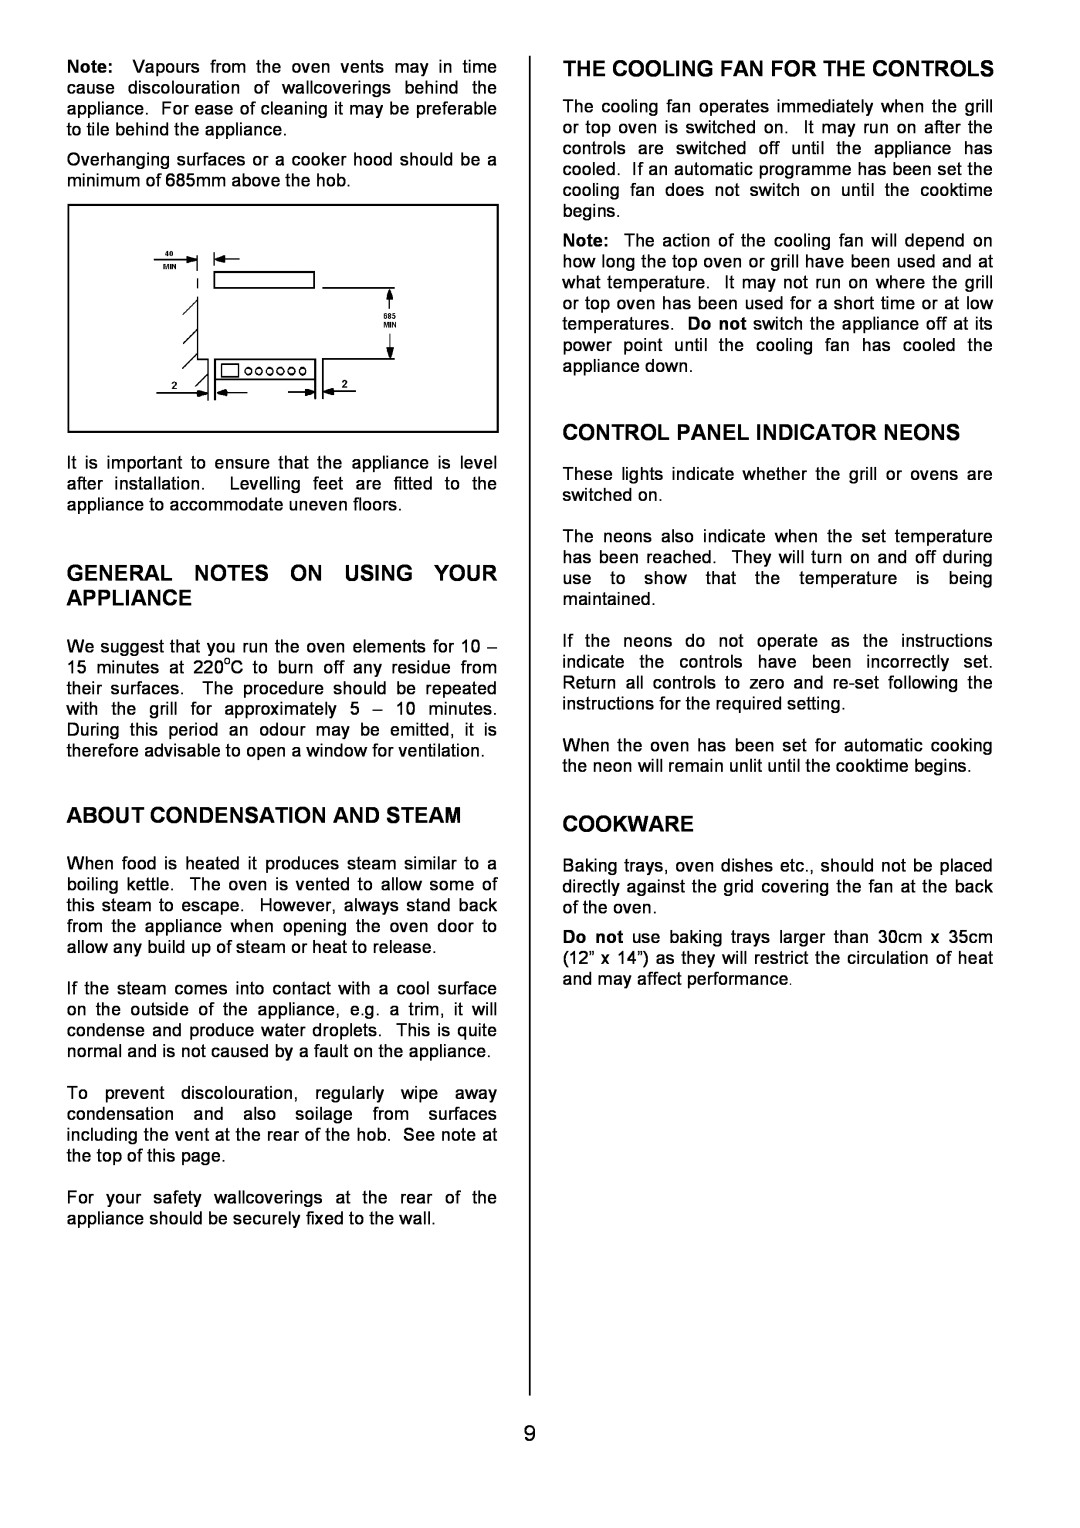 Tricity Bendix SIE531 General Notes On Using Your Appliance, About Condensation And Steam, Control Panel Indicator Neons 